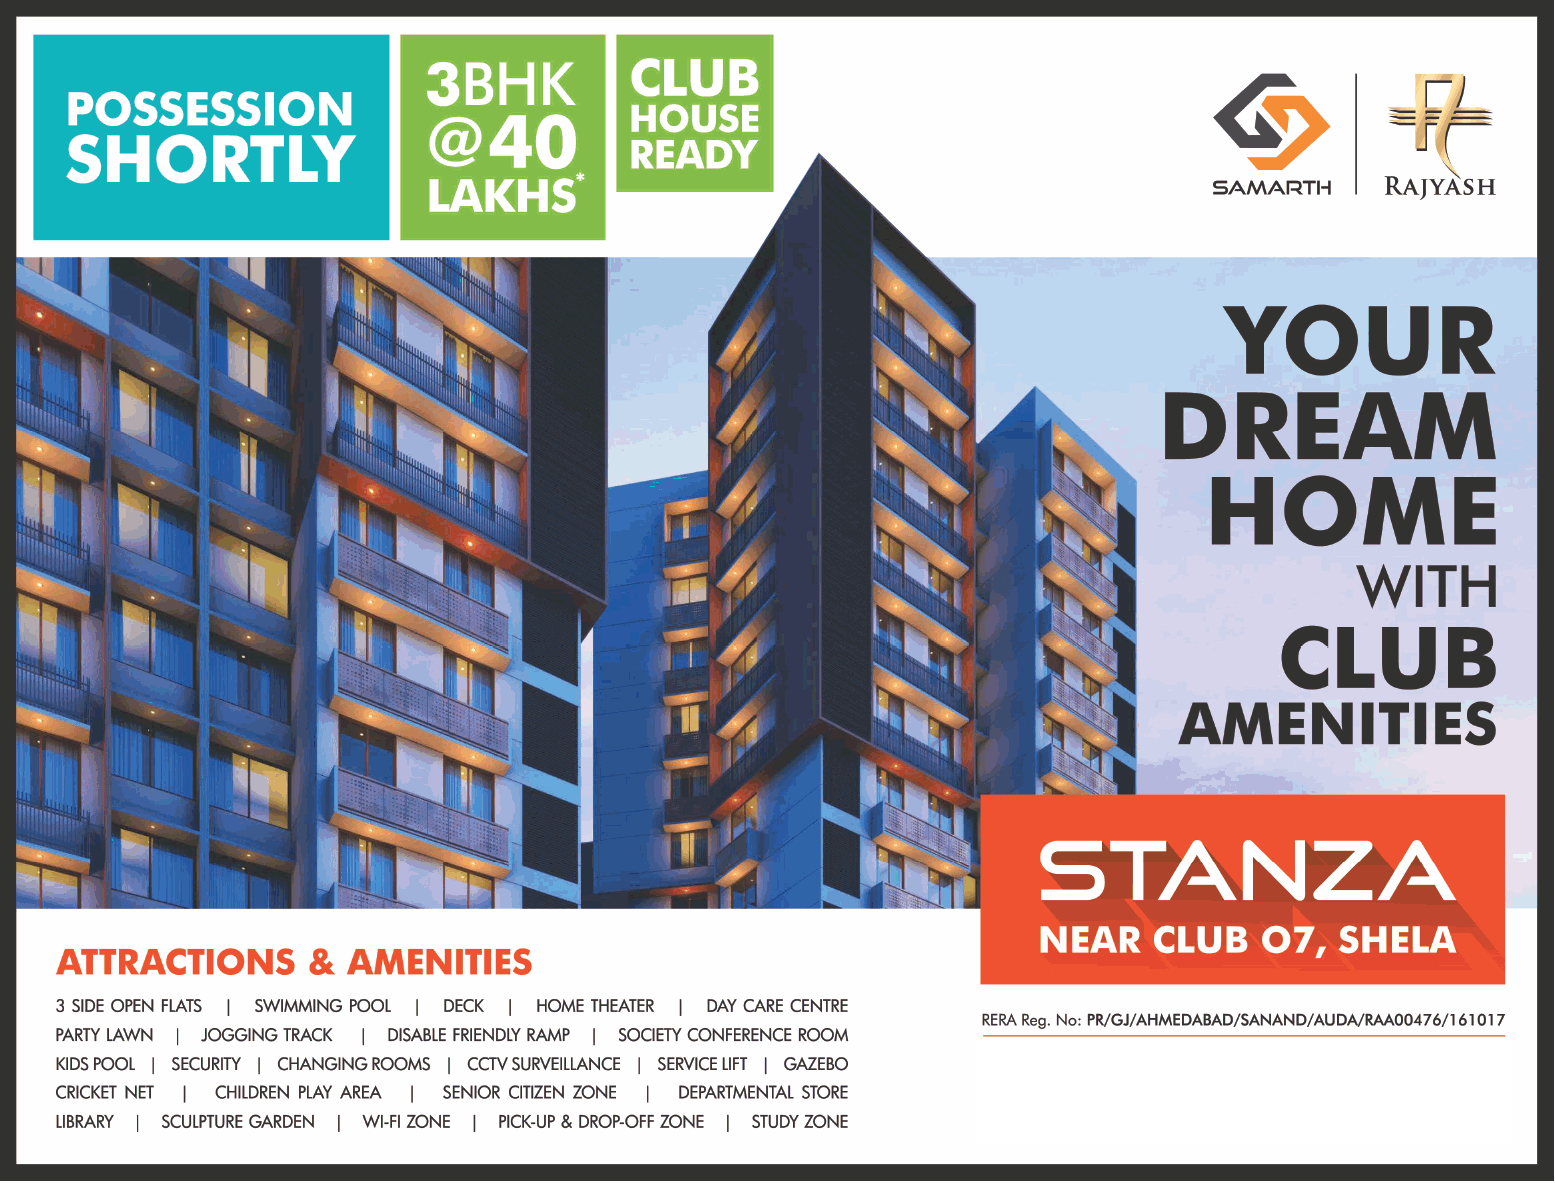 Book your dream home with club amenities at Samarth Stanza in Ahmedabad